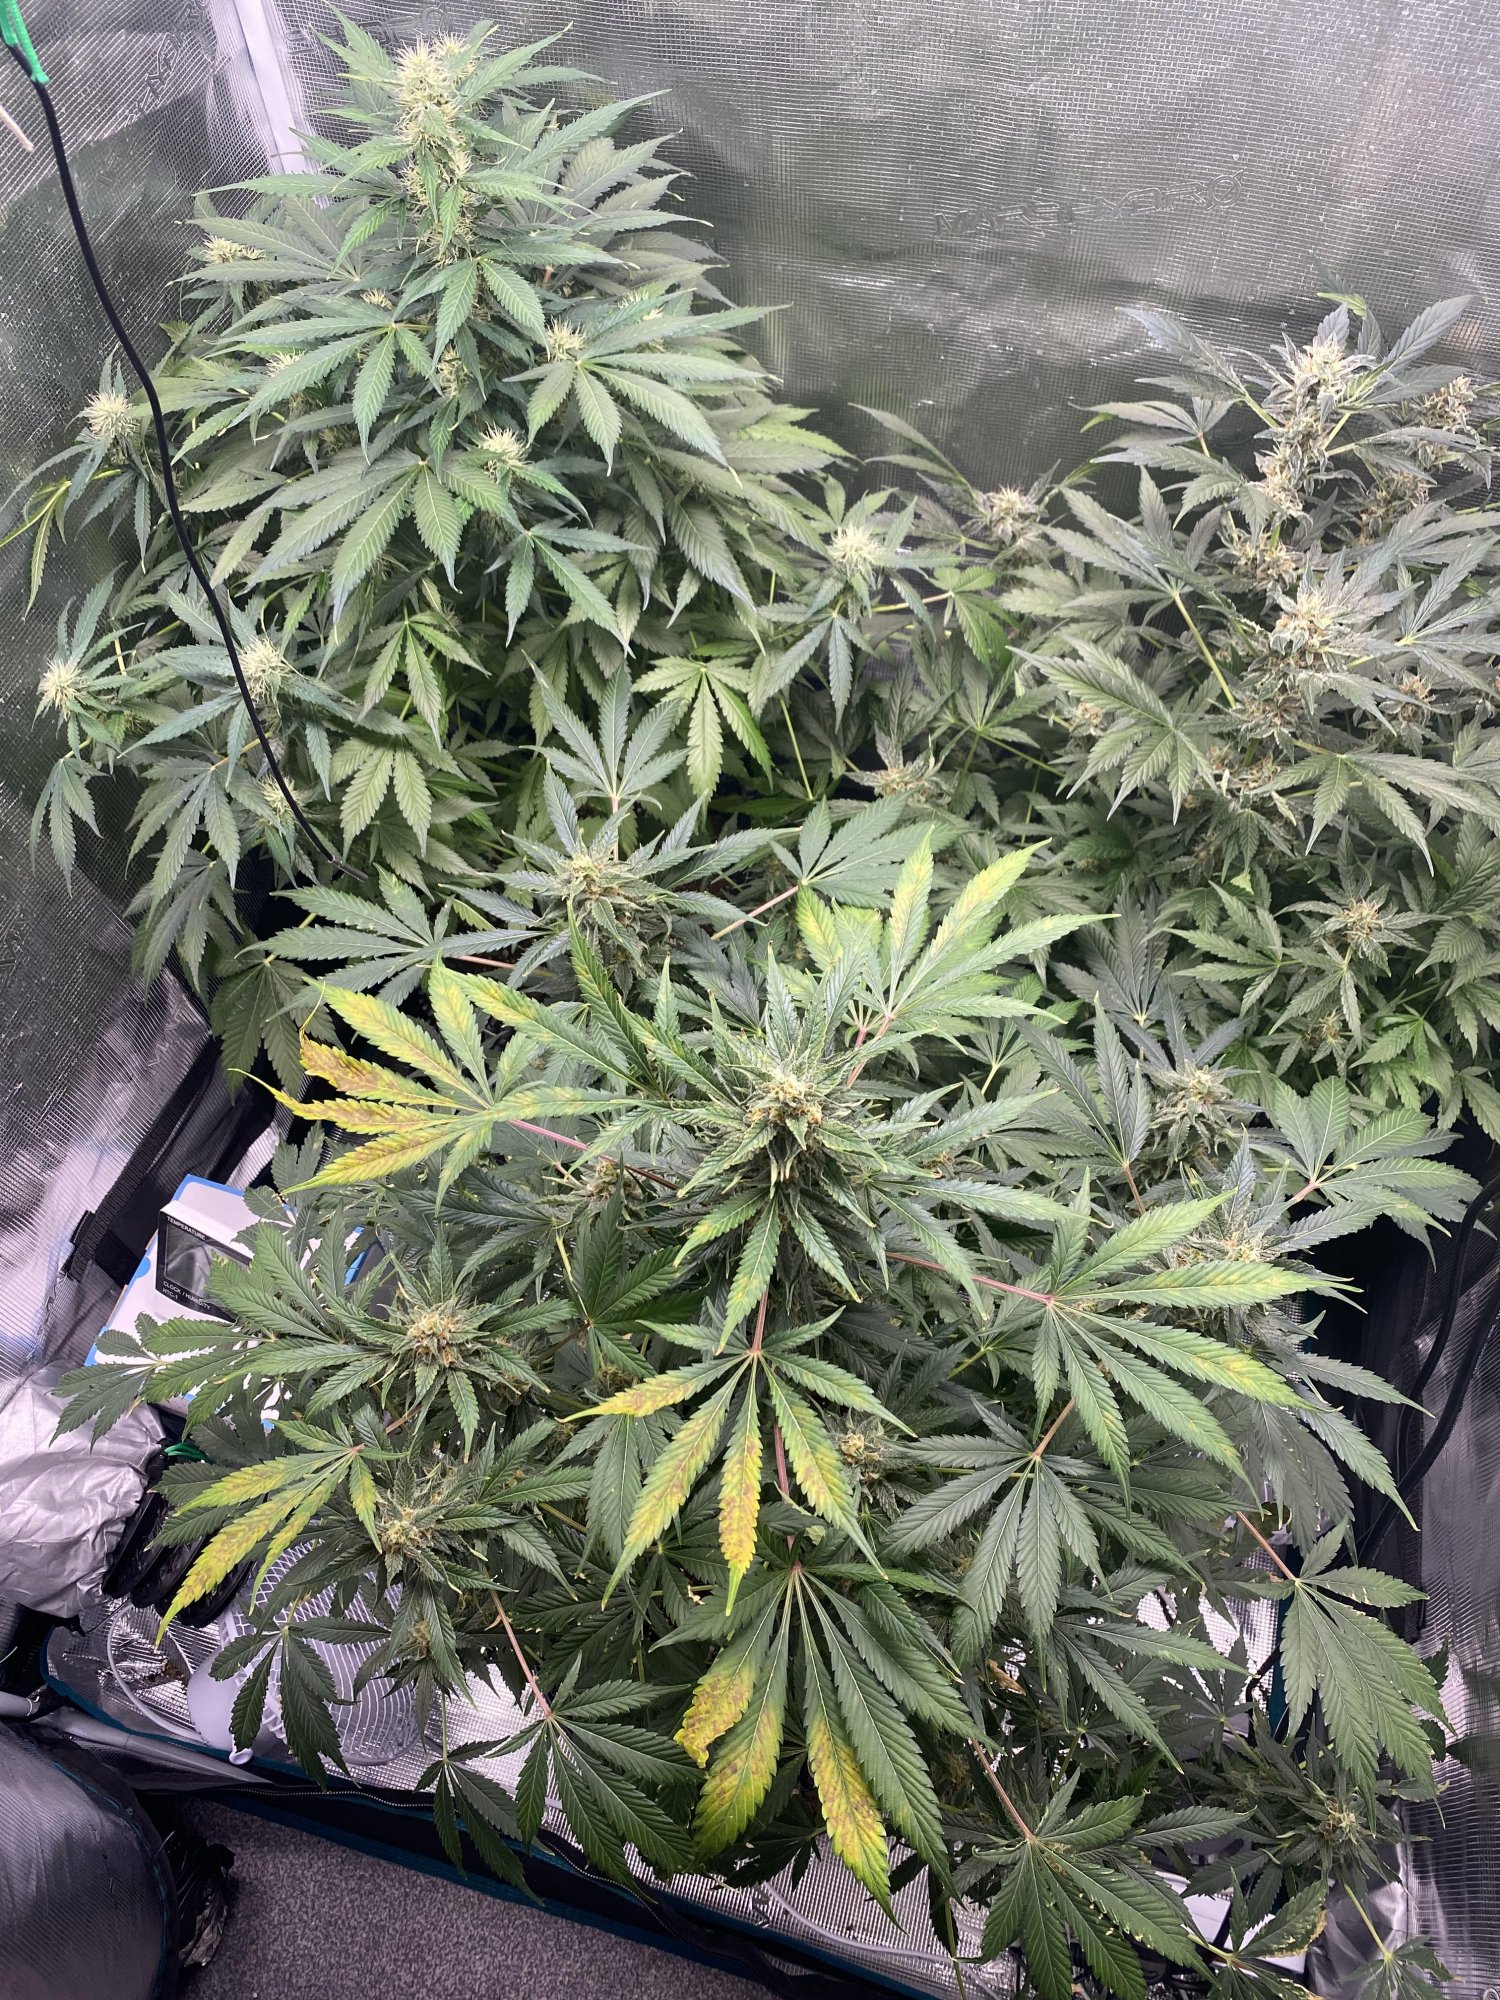 Plant getting ill at the flowering need help 2